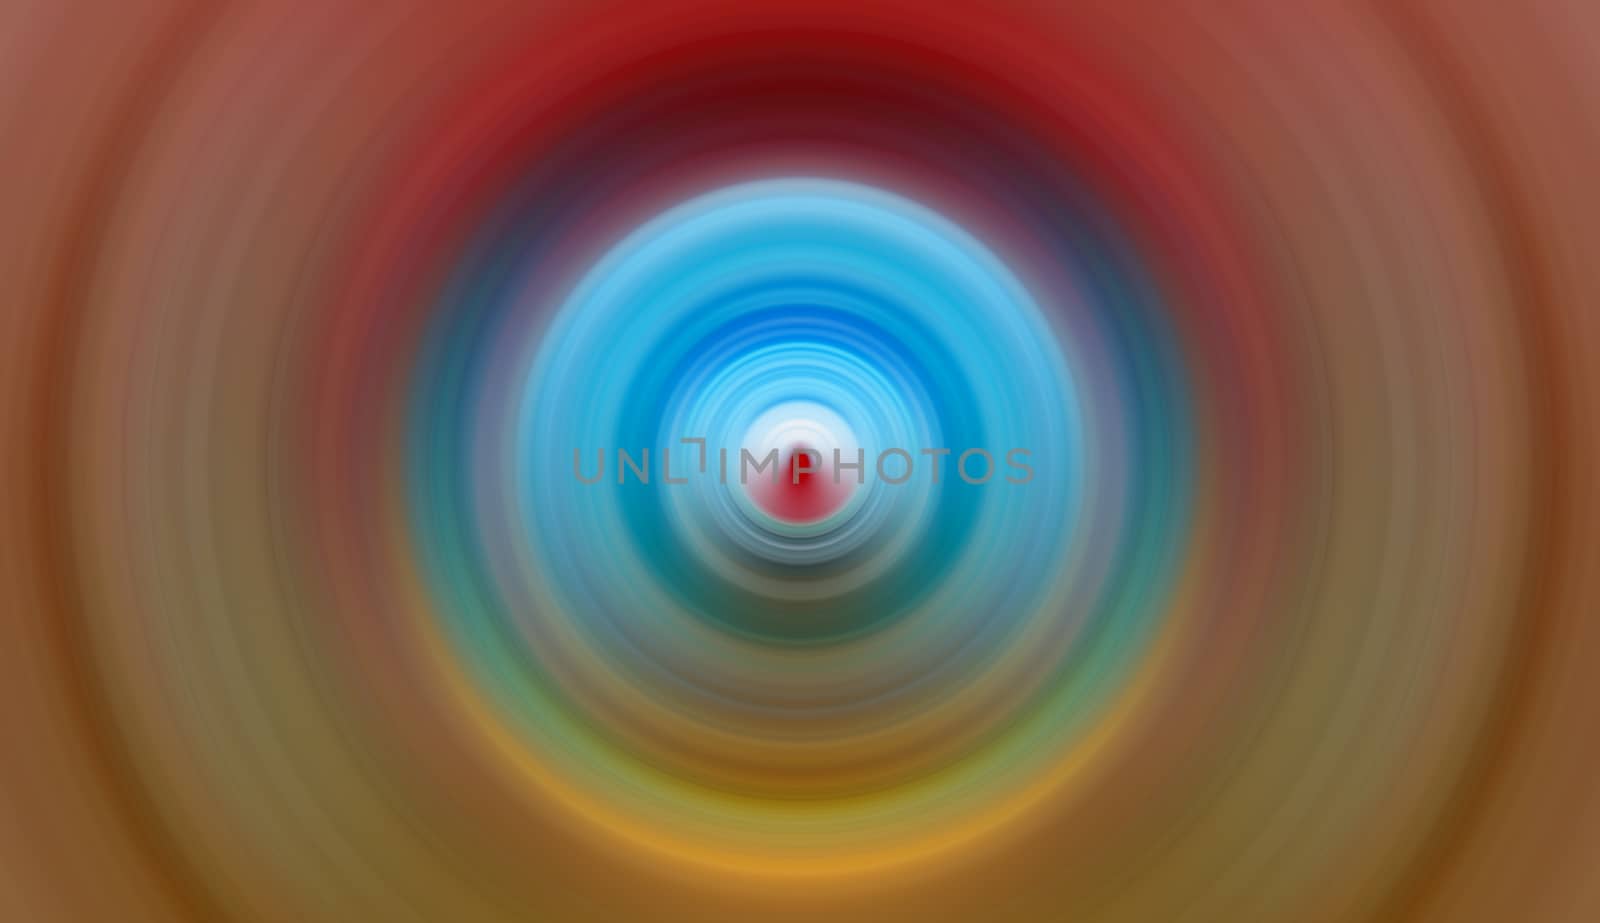 Abstract round background. Circles from the center point. Image of diverging circles. Rotation that creates circles.